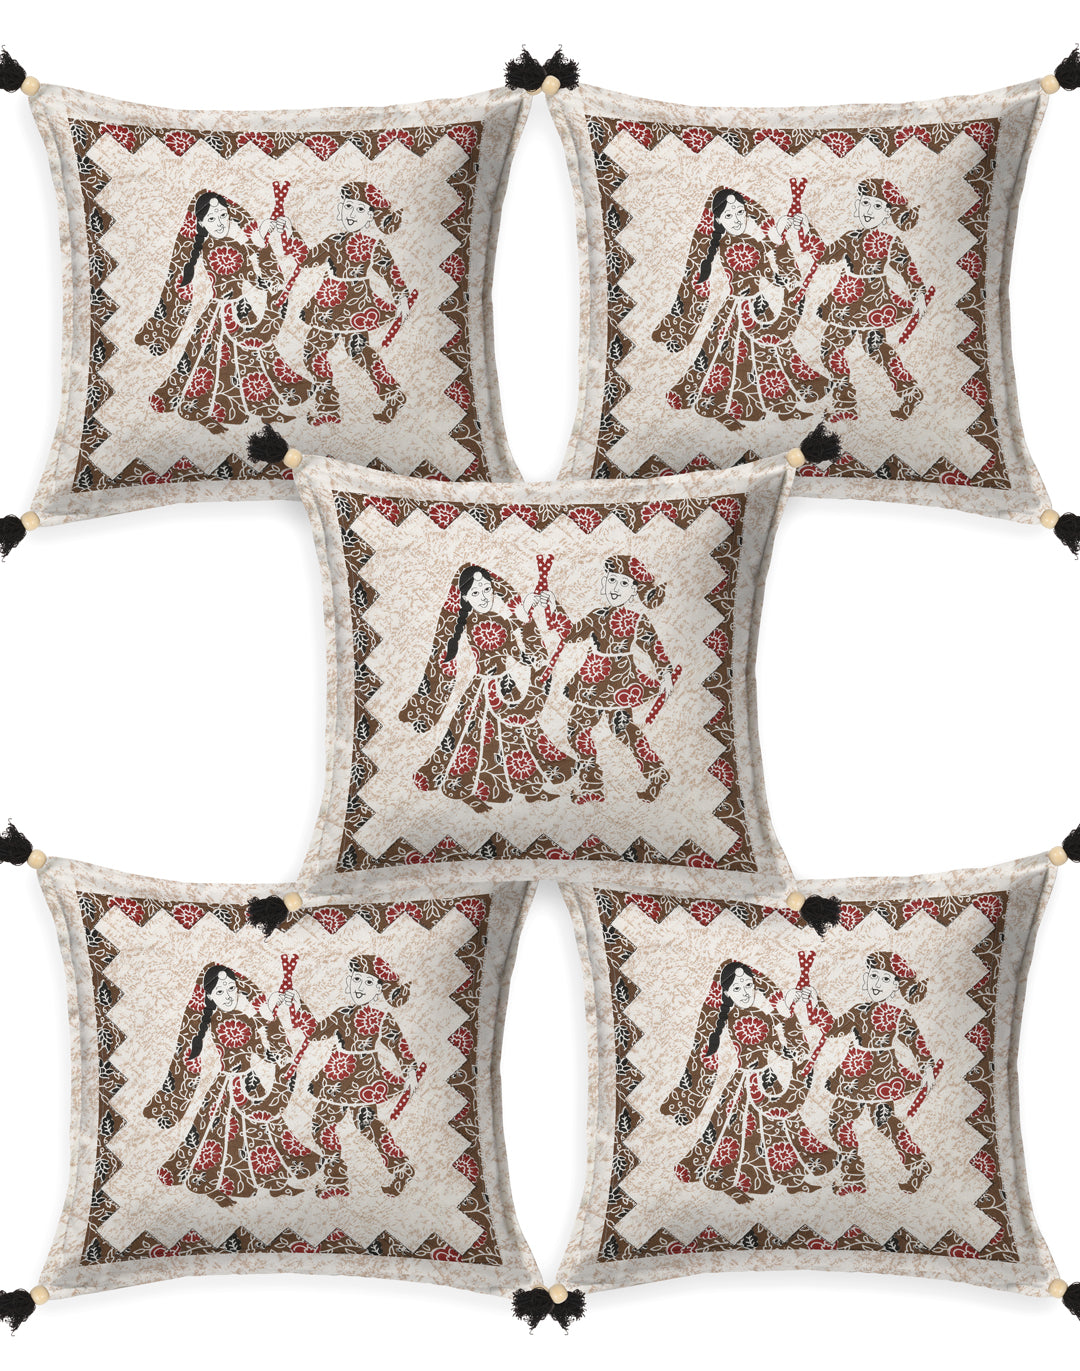 Living Roots Camel Patchwork Cotton Cushion Cover- Set of 5 (40-026-A)